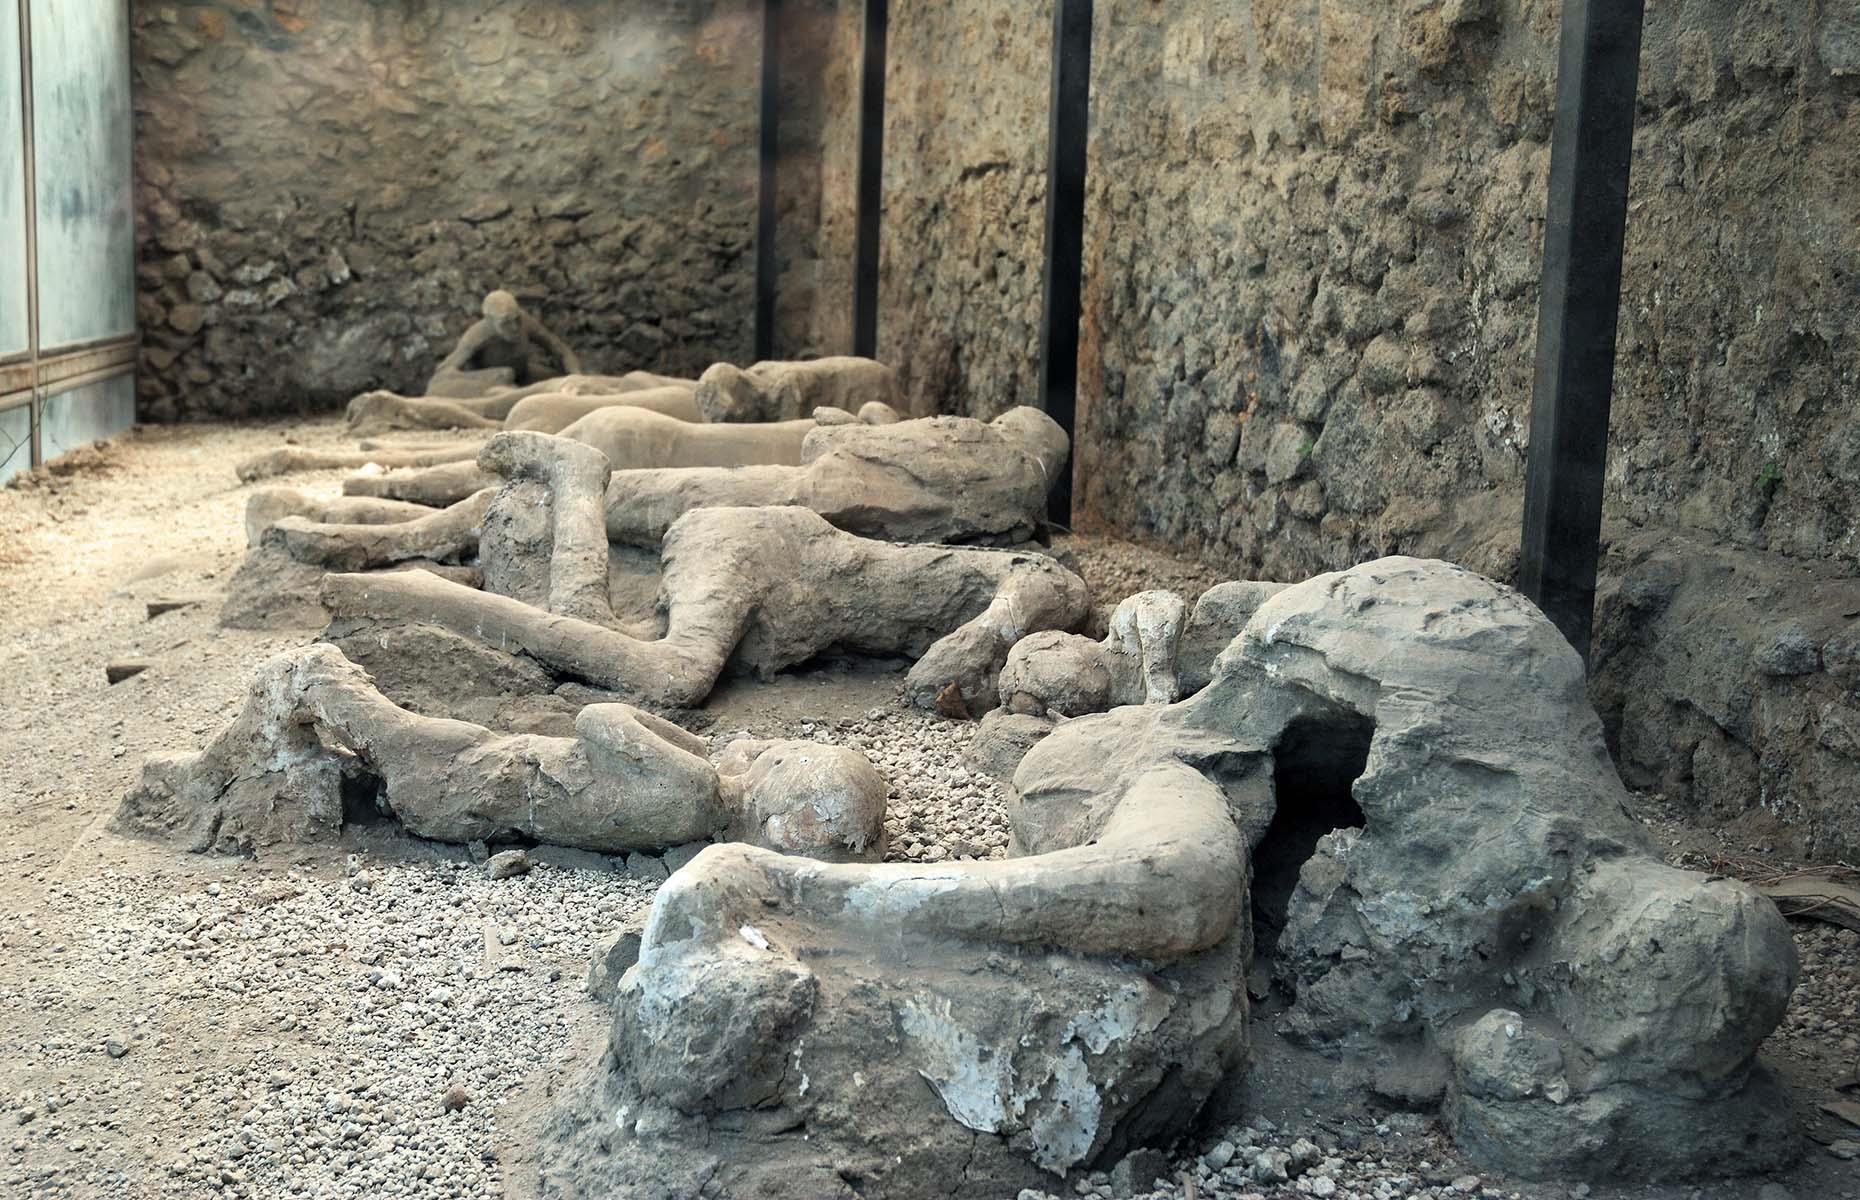 <p>Flows of lava and toxic gases continued for days, long after there was any hope of survival, leaving Pompeii and Herculaneum buried under dense layers of ash at a whopping 20 feet (6-7m) and 66 feet (20m) thick respectively. This offers a clue as to why the smaller town is less-known than its headline-grabbing counterpart, as it was buried deeper and took longer to excavate than Pompeii.</p>  <p>Yet in both cases, the ash preserved not only the bodies of the volcano’s victims, but also surprising insights into daily life in this Roman riviera.</p>